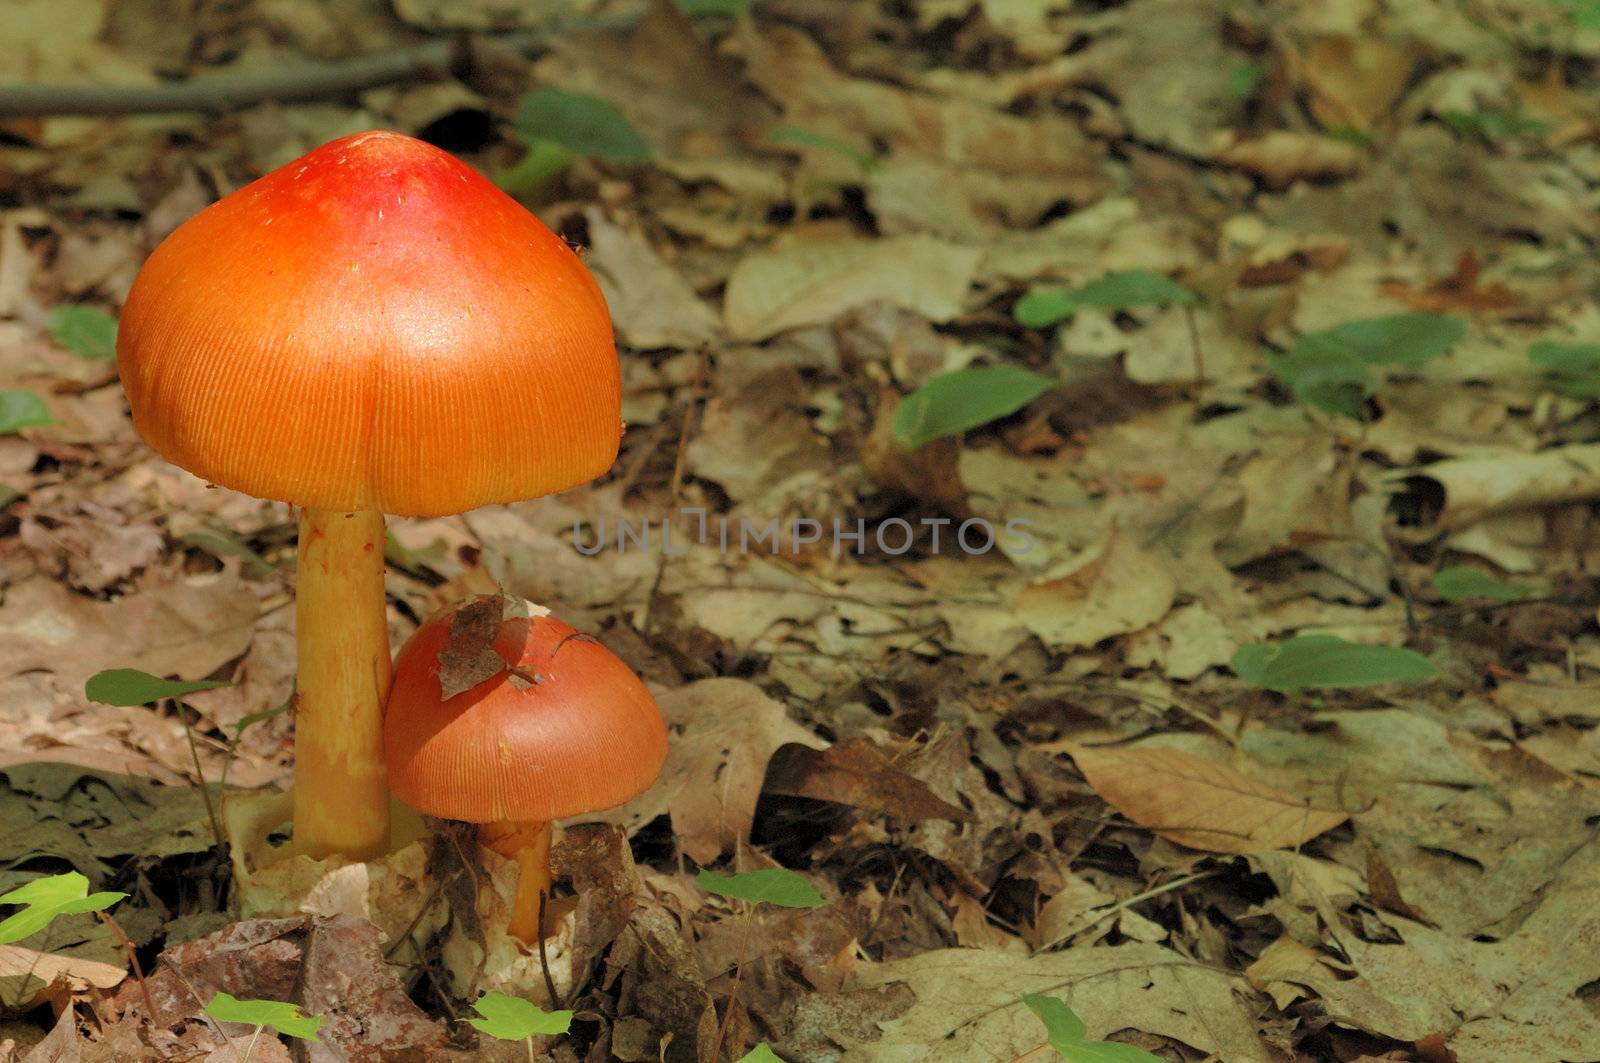 A pair of mushrooms growing on the forest floor.